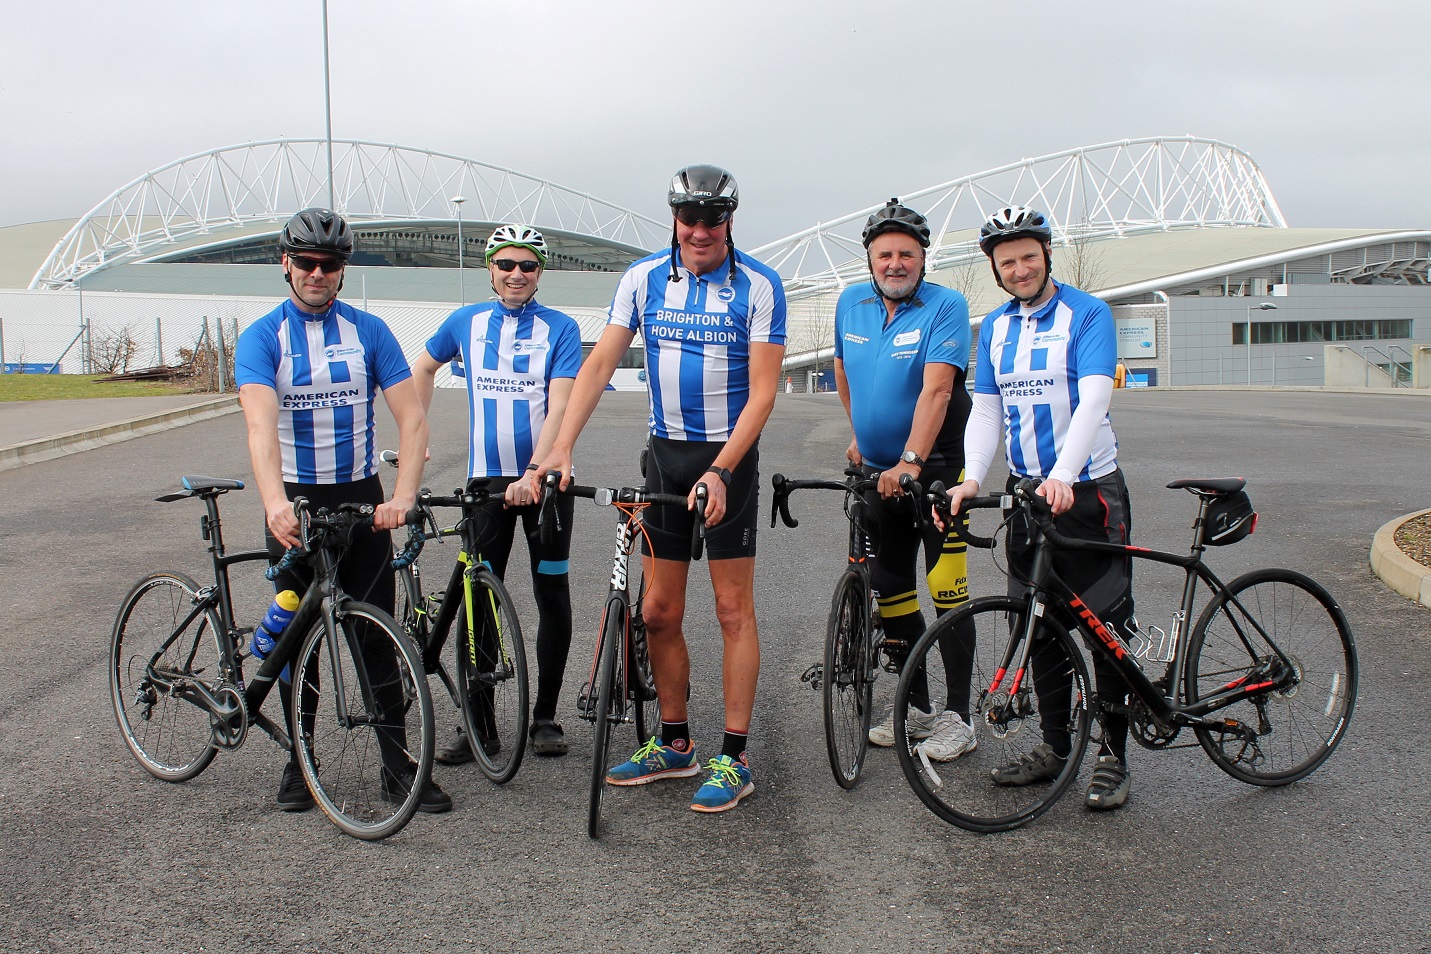 Friendship formed in the saddle is driving riders on to further support AITC